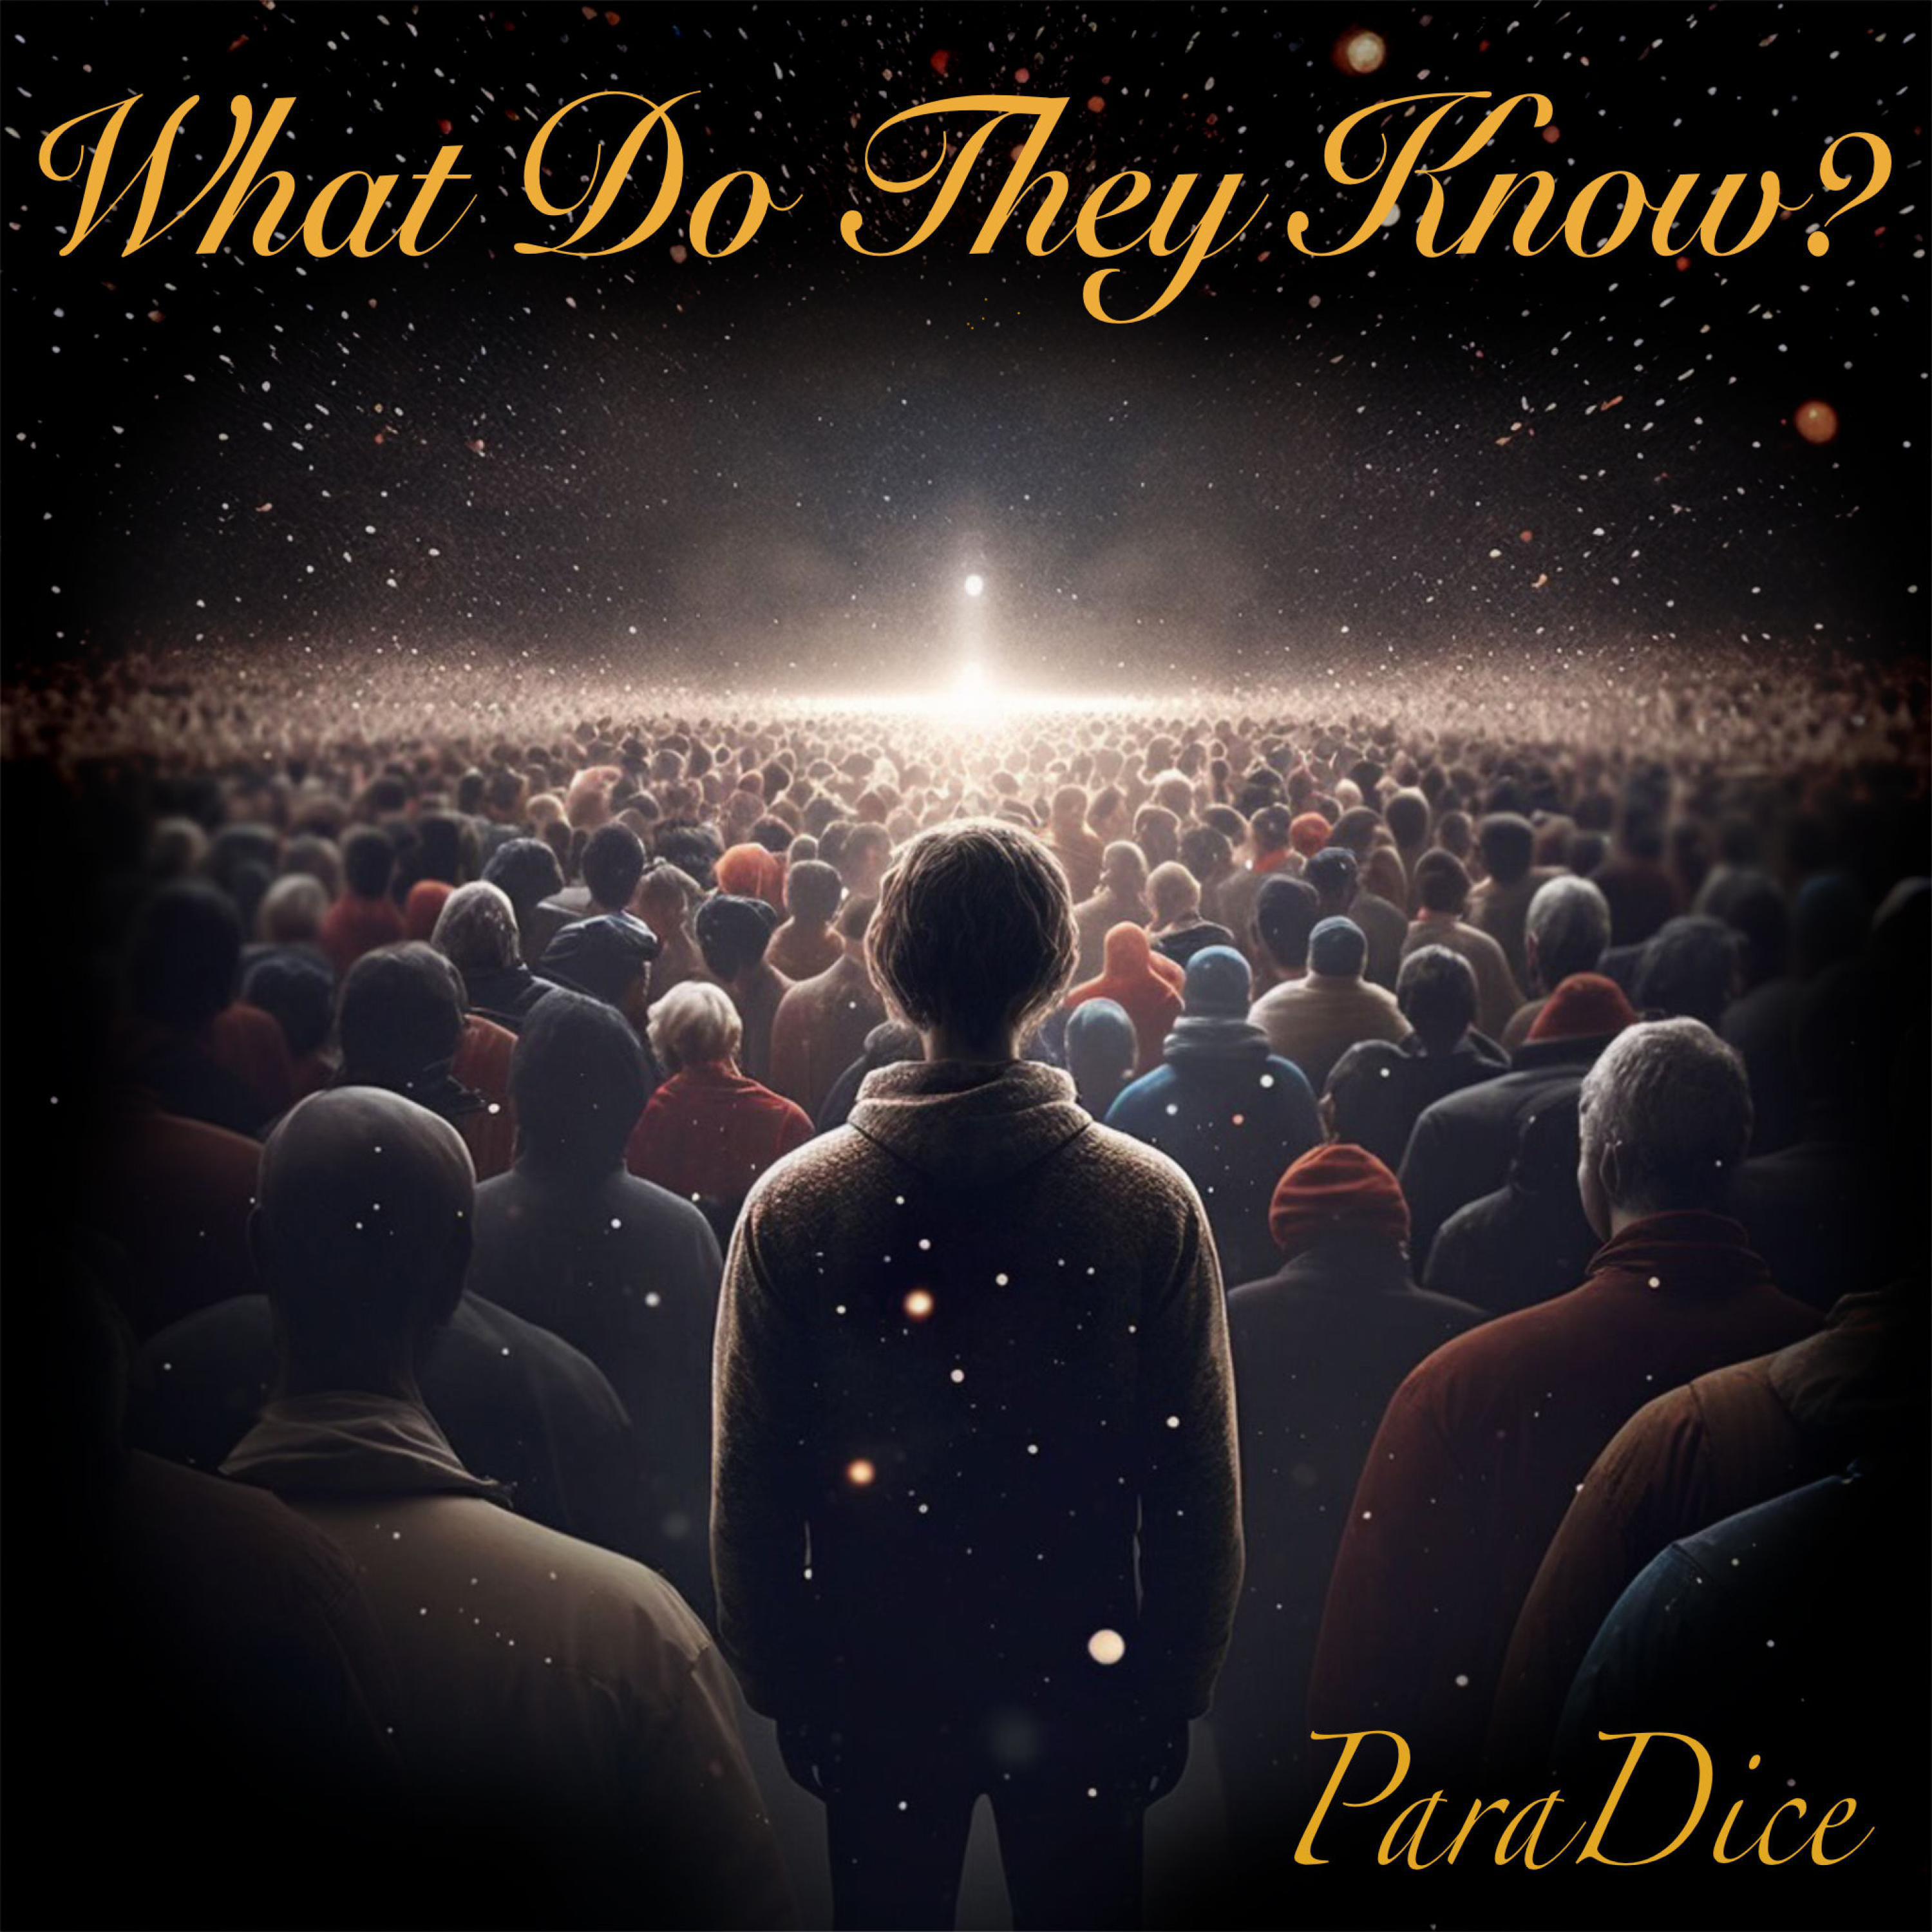 Paradice - What Do They Know?